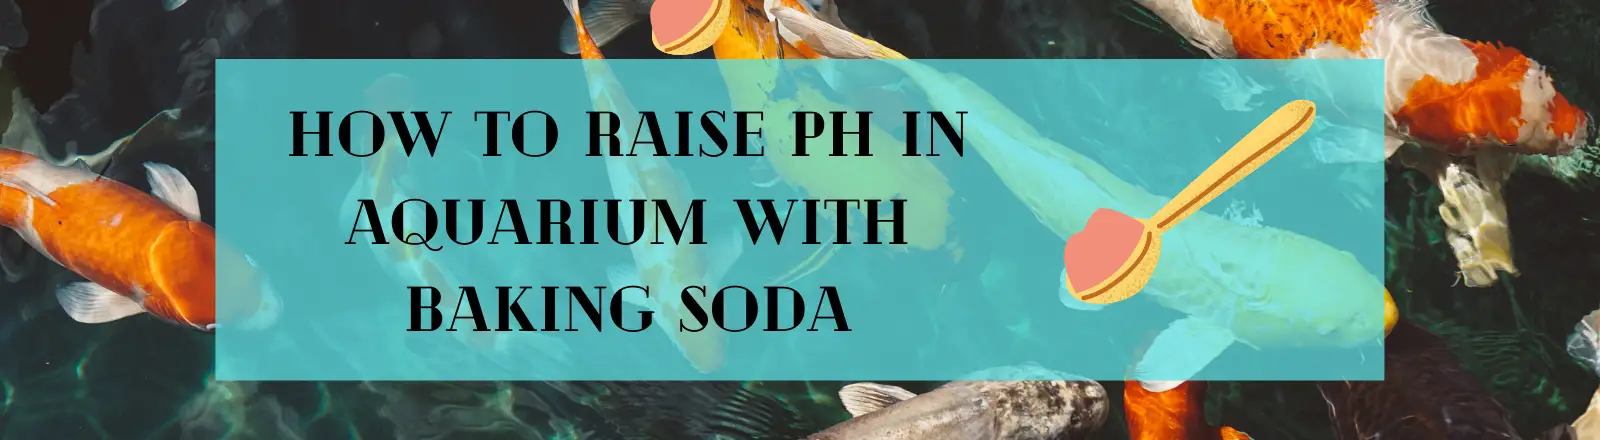 How to raise pH in fish tank with Baking soda- [Complete guide]